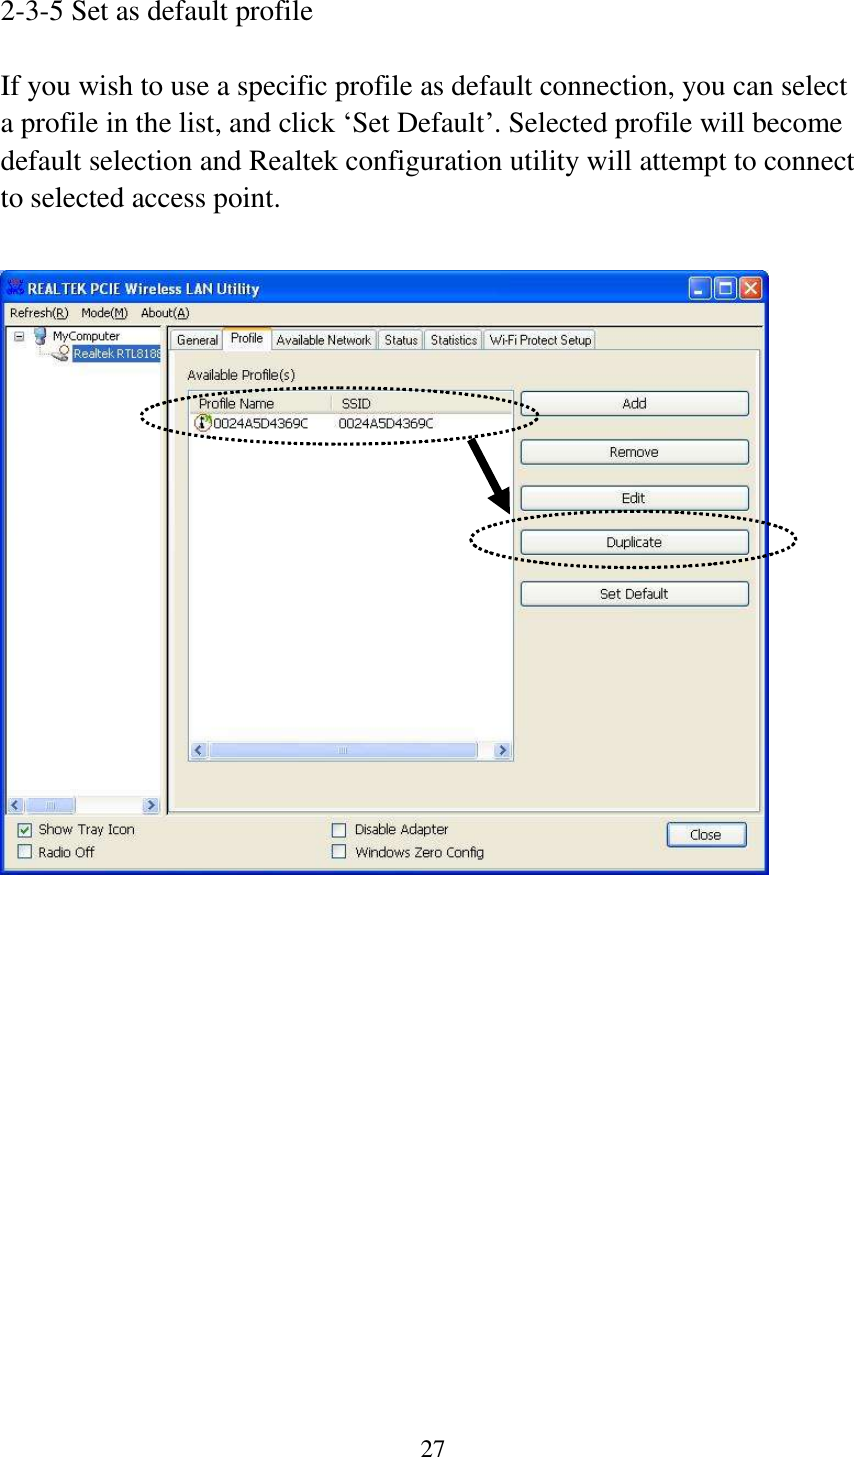 27  2-3-5 Set as default profile  If you wish to use a specific profile as default connection, you can select a profile in the list, and click ‘Set Default’. Selected profile will become default selection and Realtek configuration utility will attempt to connect to selected access point.               